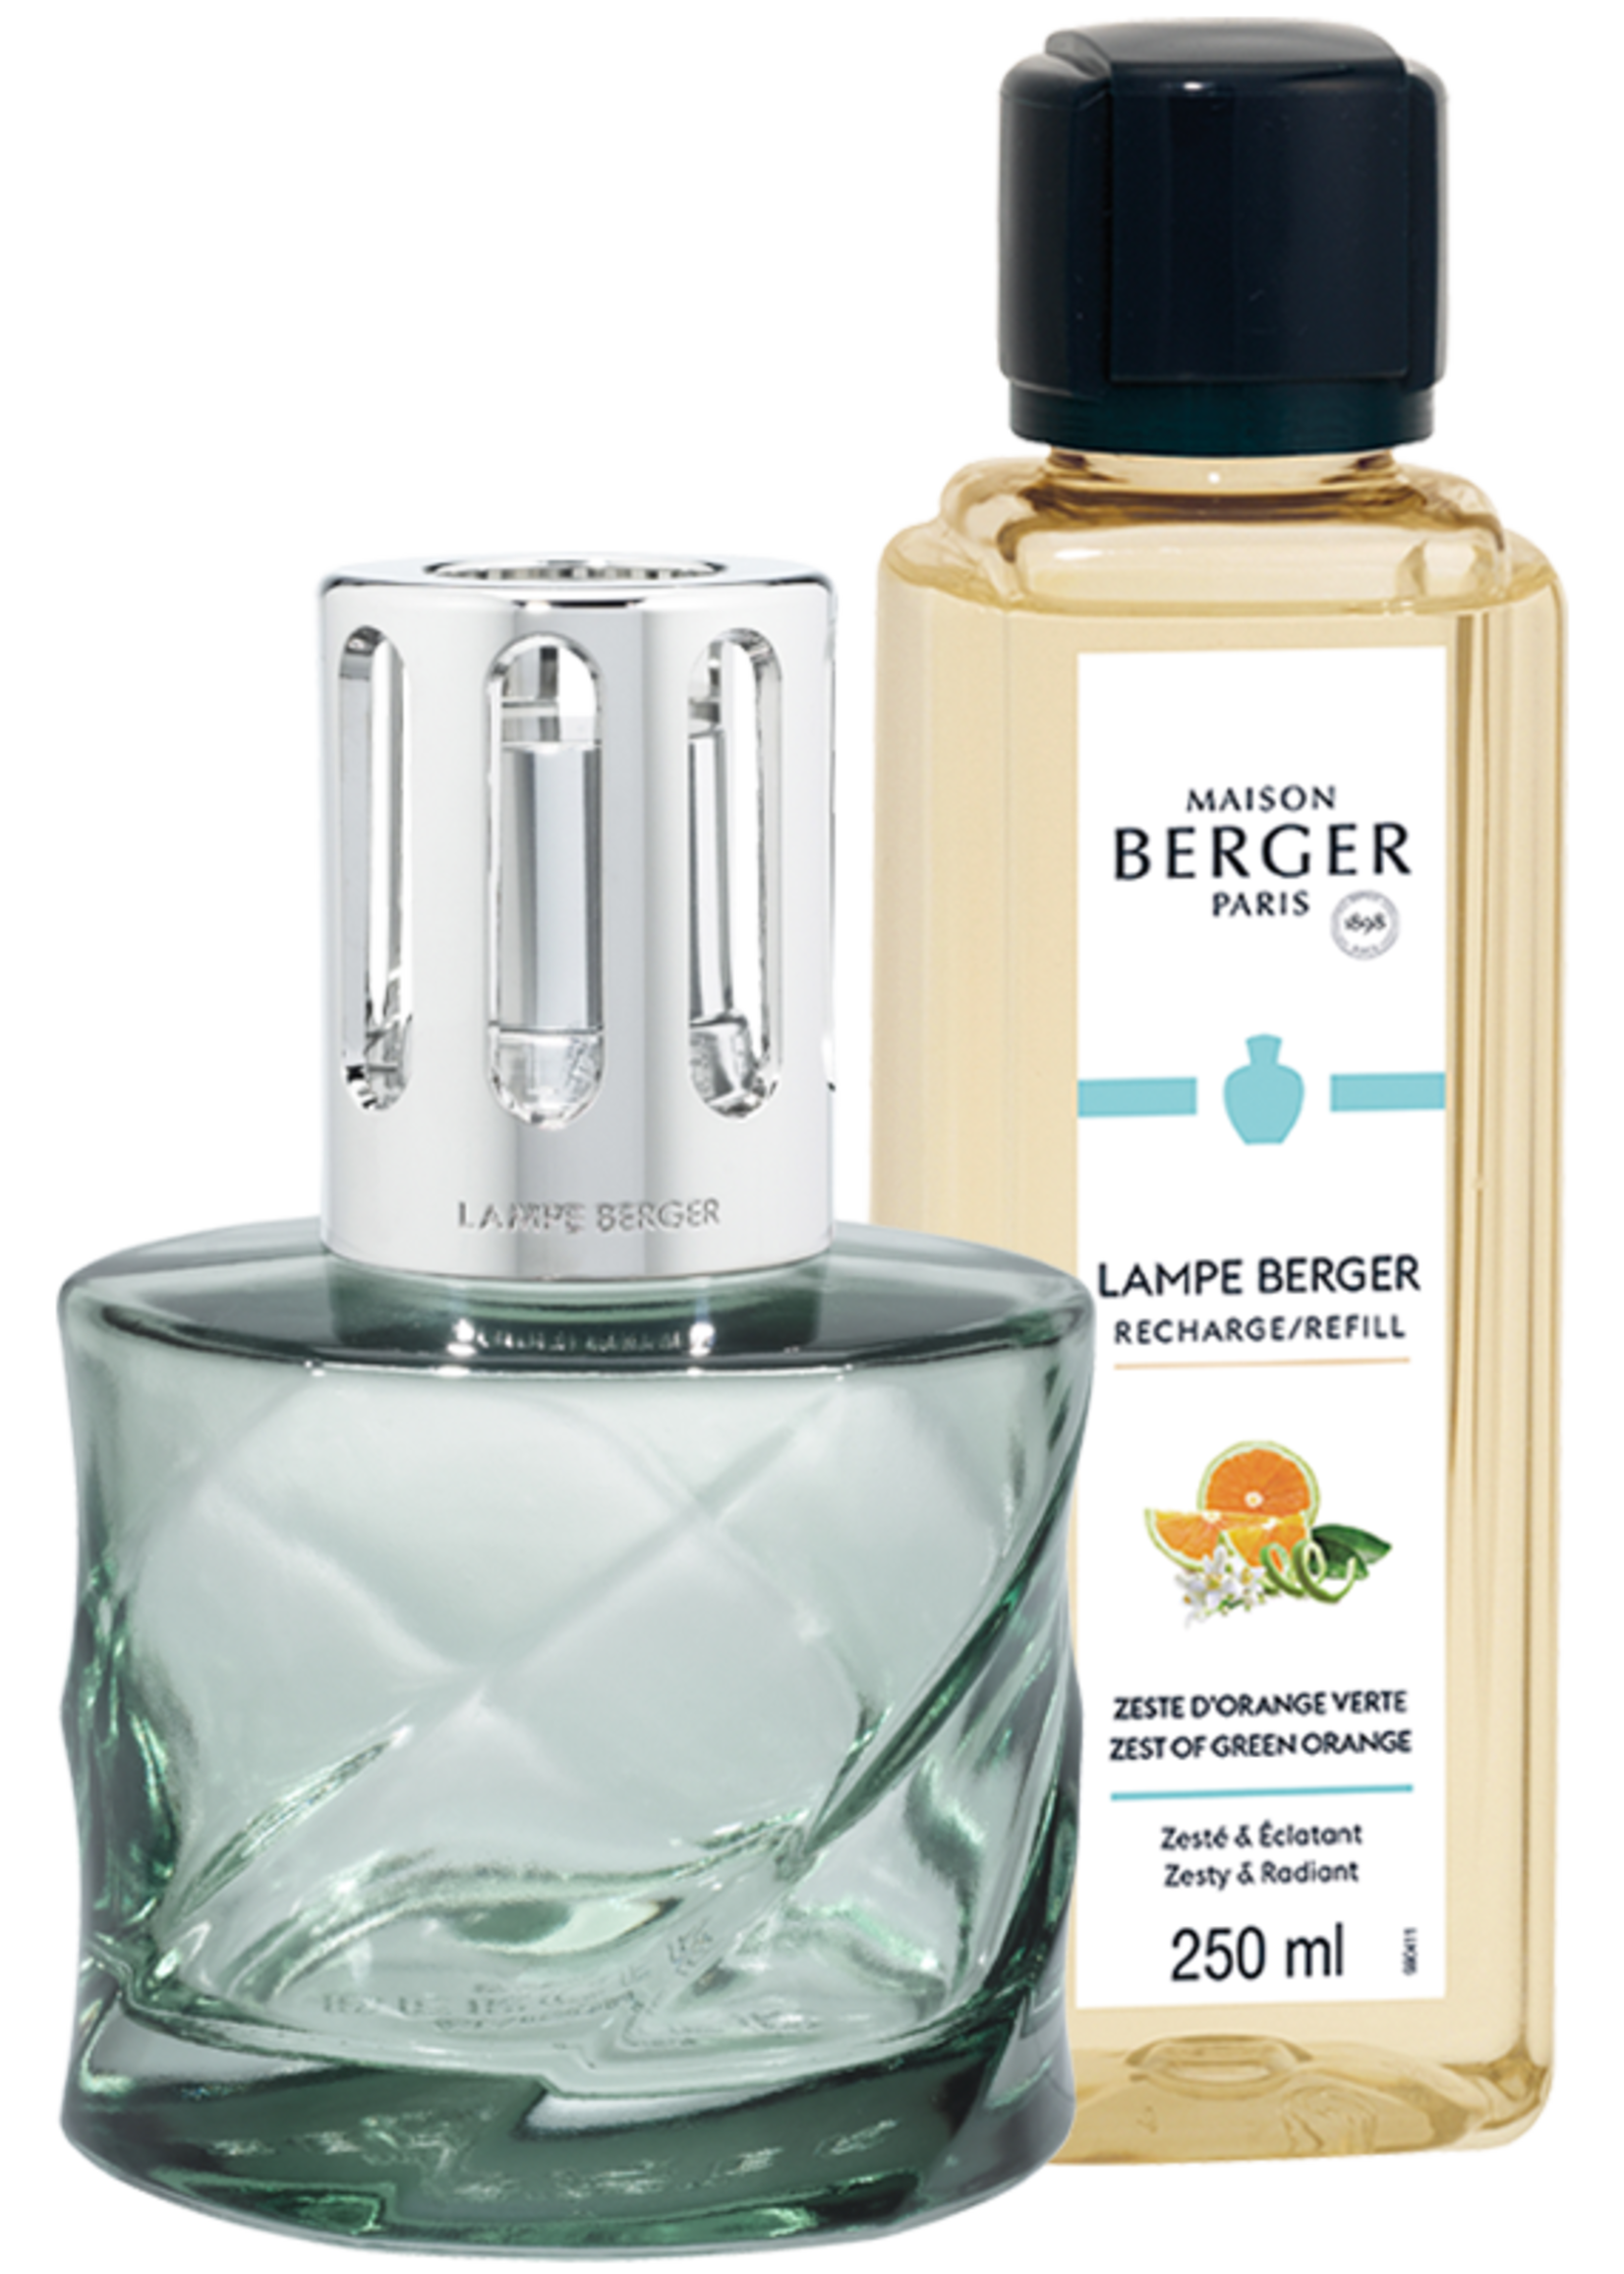 Maison Berger Giftset Lampe Berger Dolce